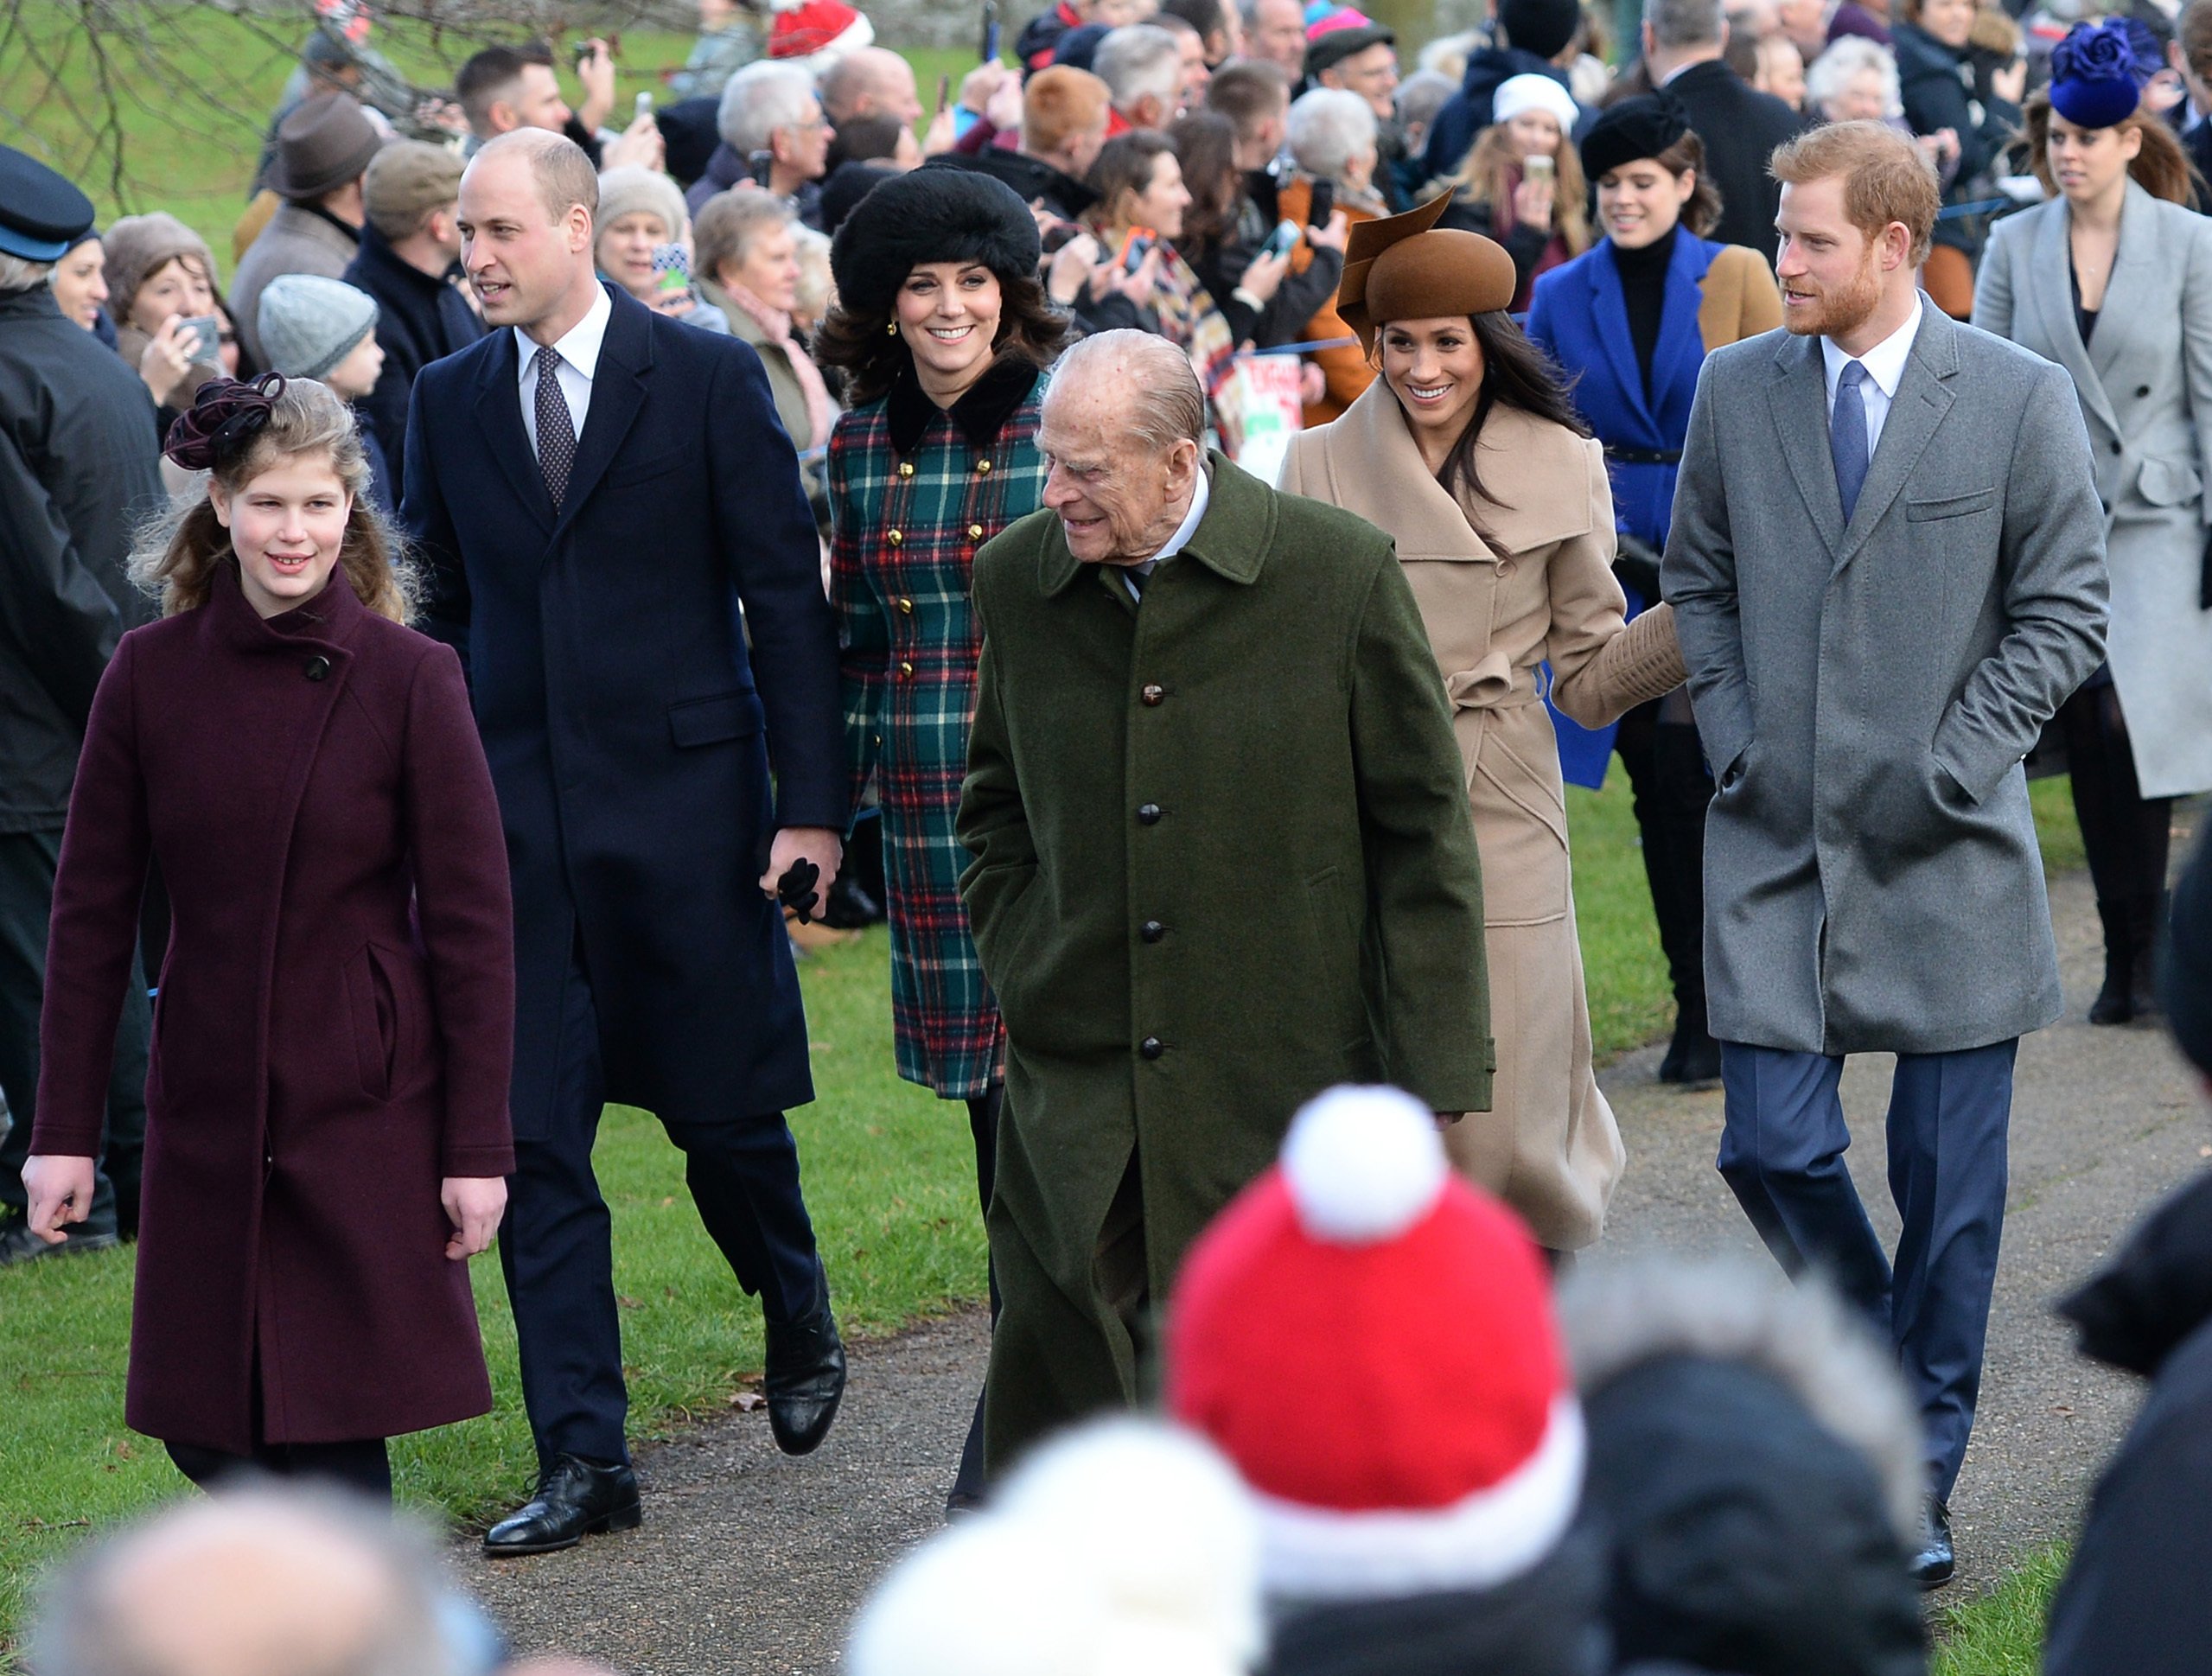 Prince Harry and Meghan Markle walking to church with Prince William, Kate Middleton and other members of the royal family